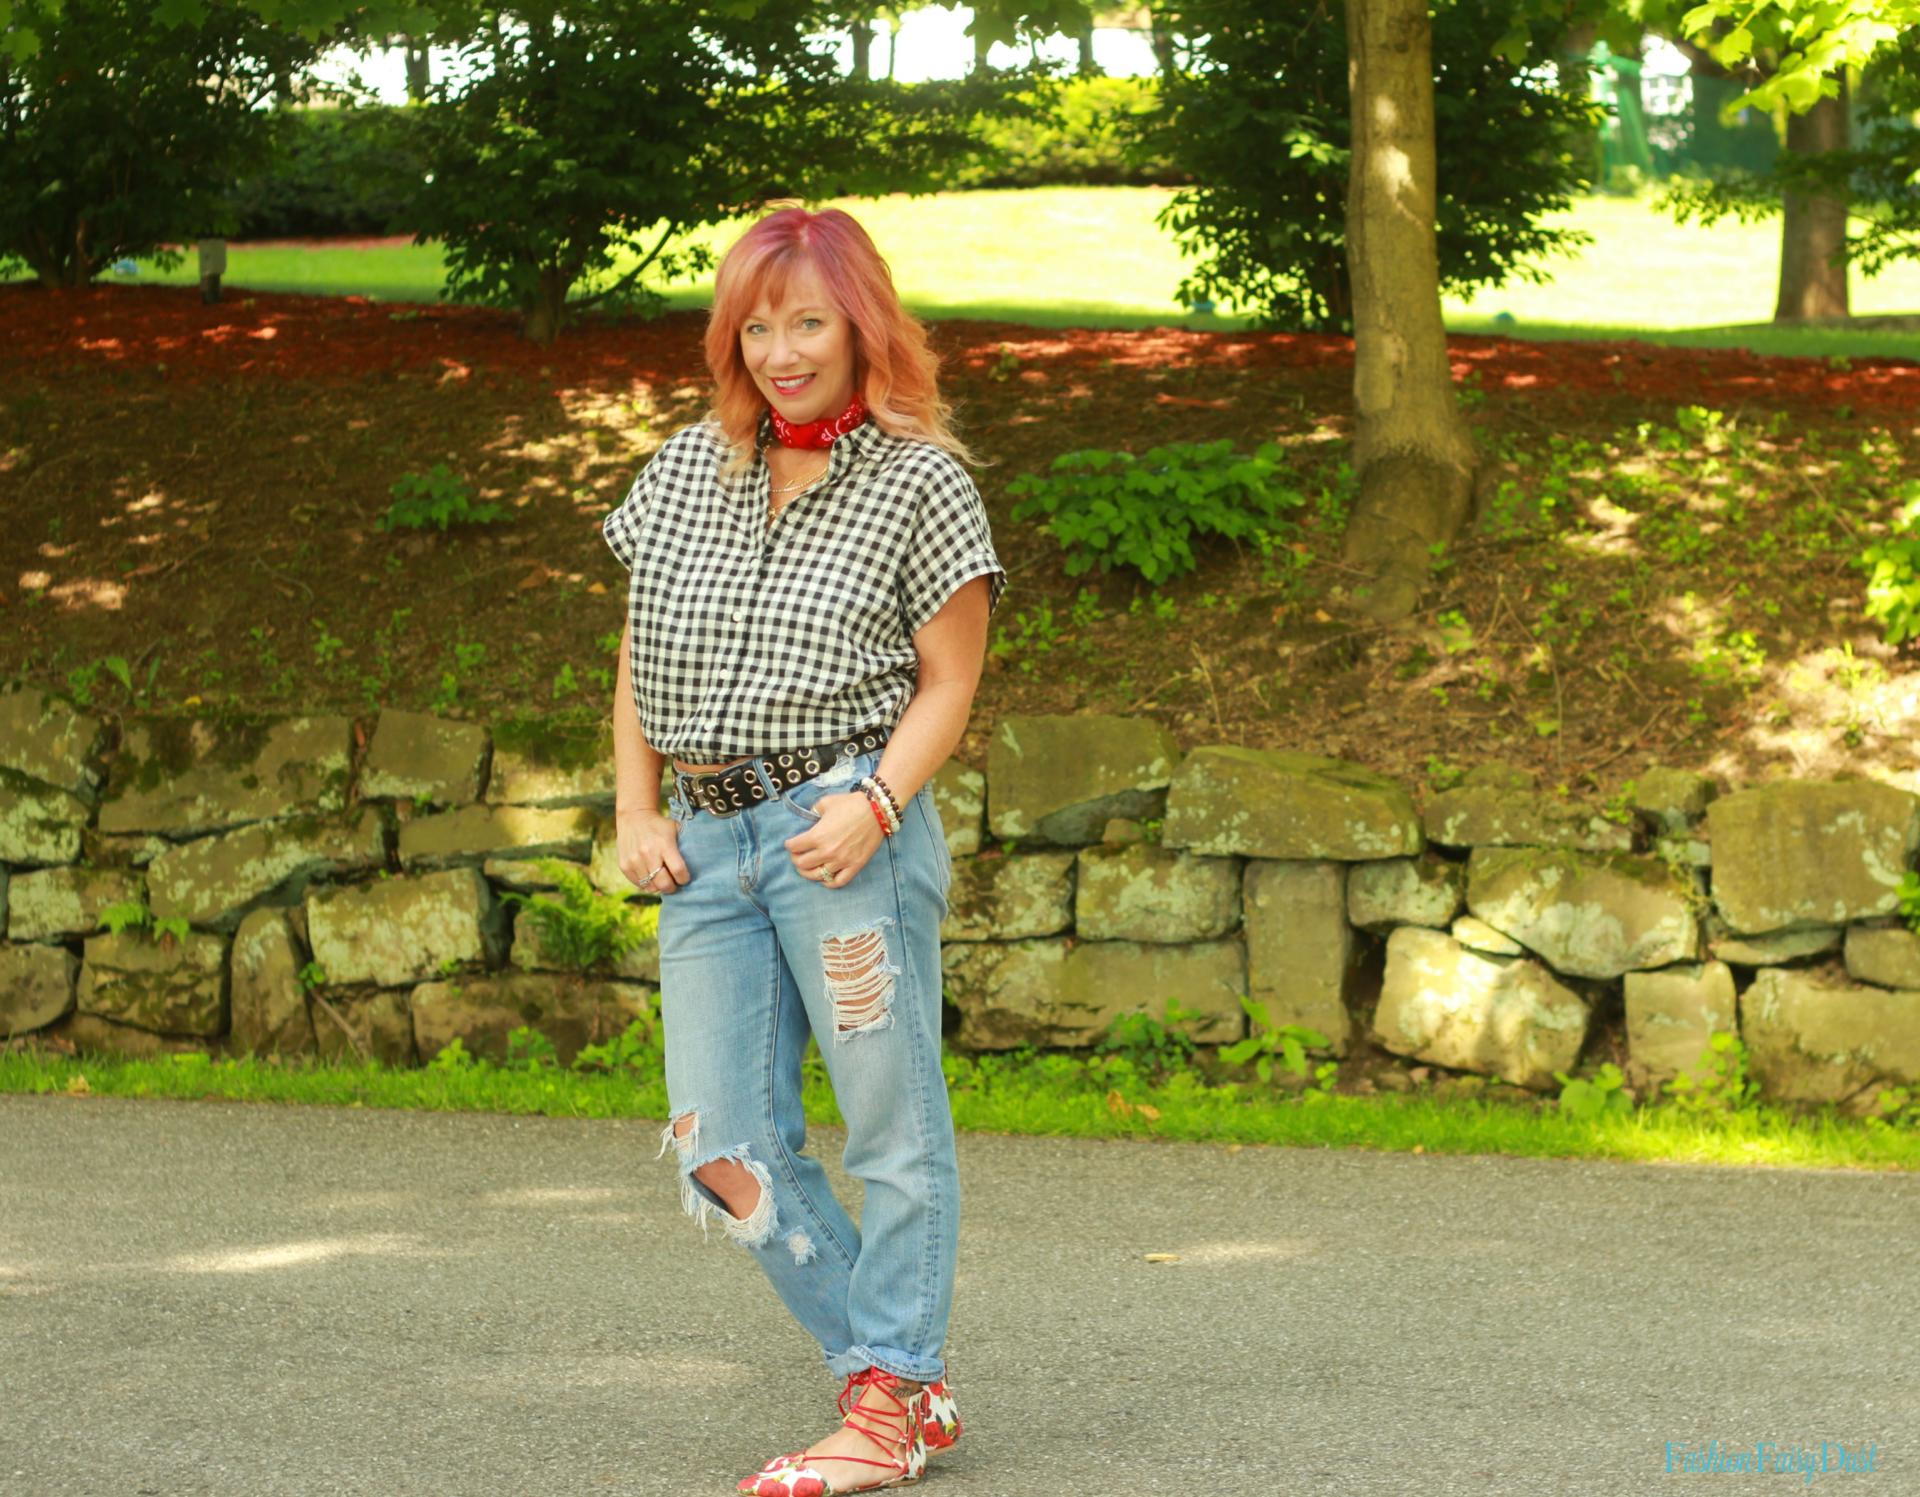 Gingham shirt, floral lace up flats and boyfriend jeans.